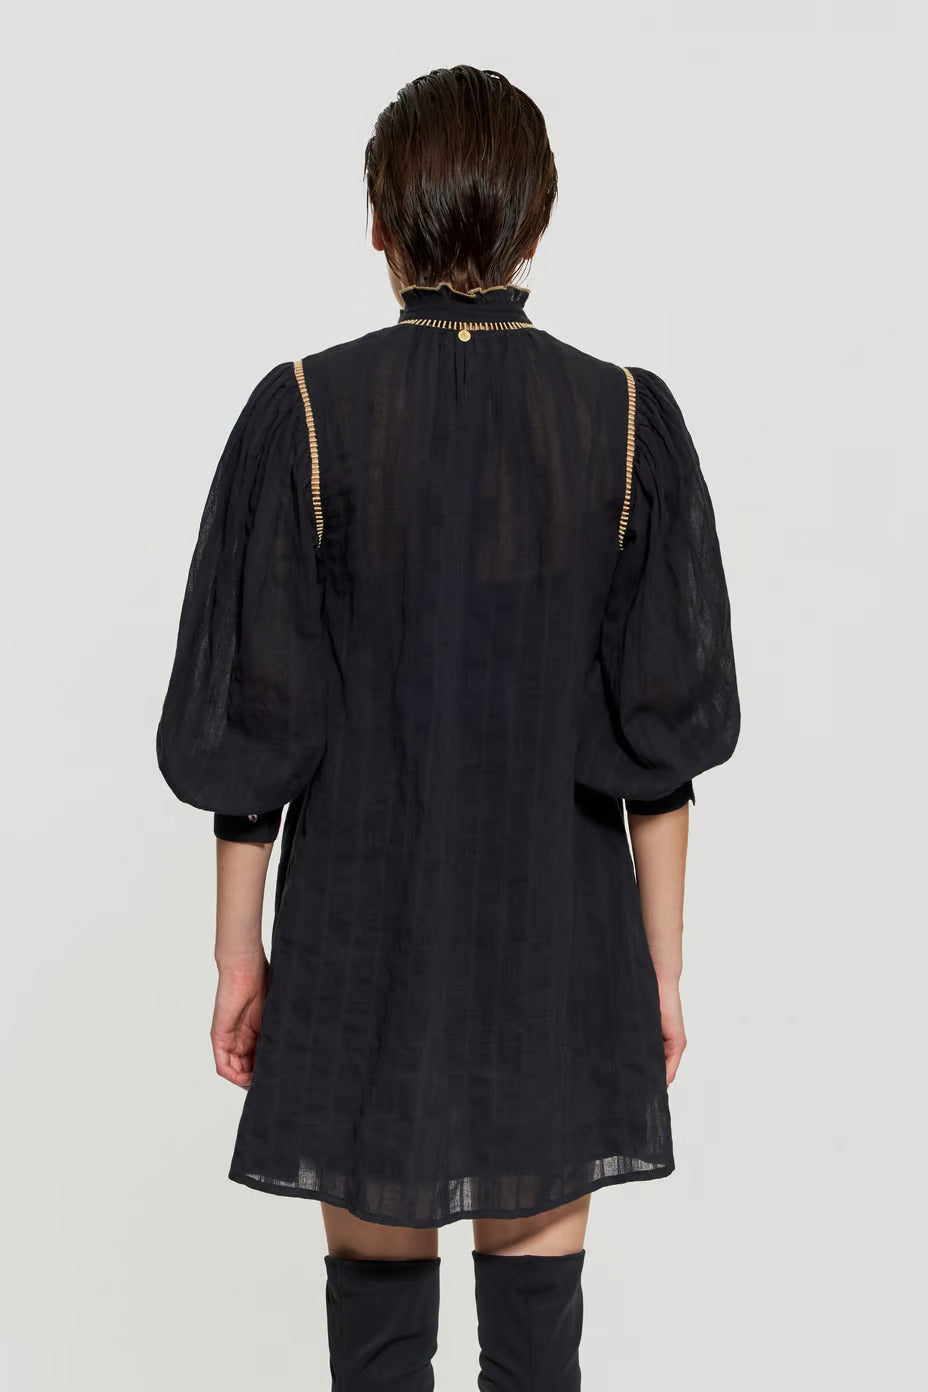 ANTIK BATIK _ Savoir Faire Ethical Artisan Made Fashion _ Boho Style Popover Cotton Mini Dress w/ Handstitched Gold Floral Embroidery on Black Hand loomed Cotton